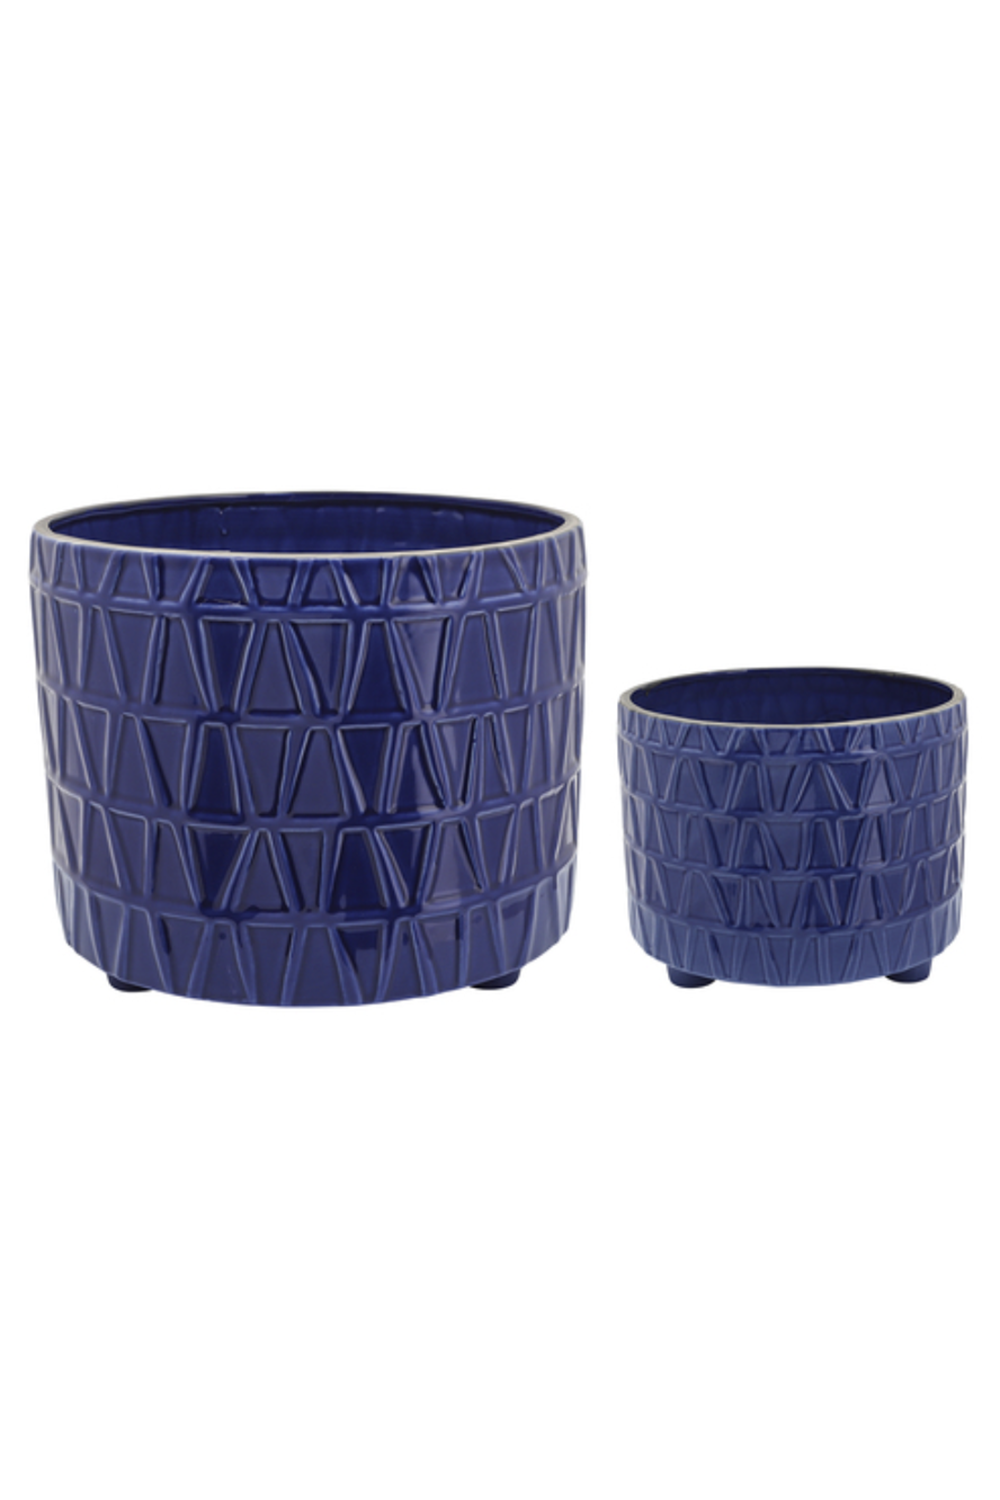 Footed Etched Planter - Royal Blue